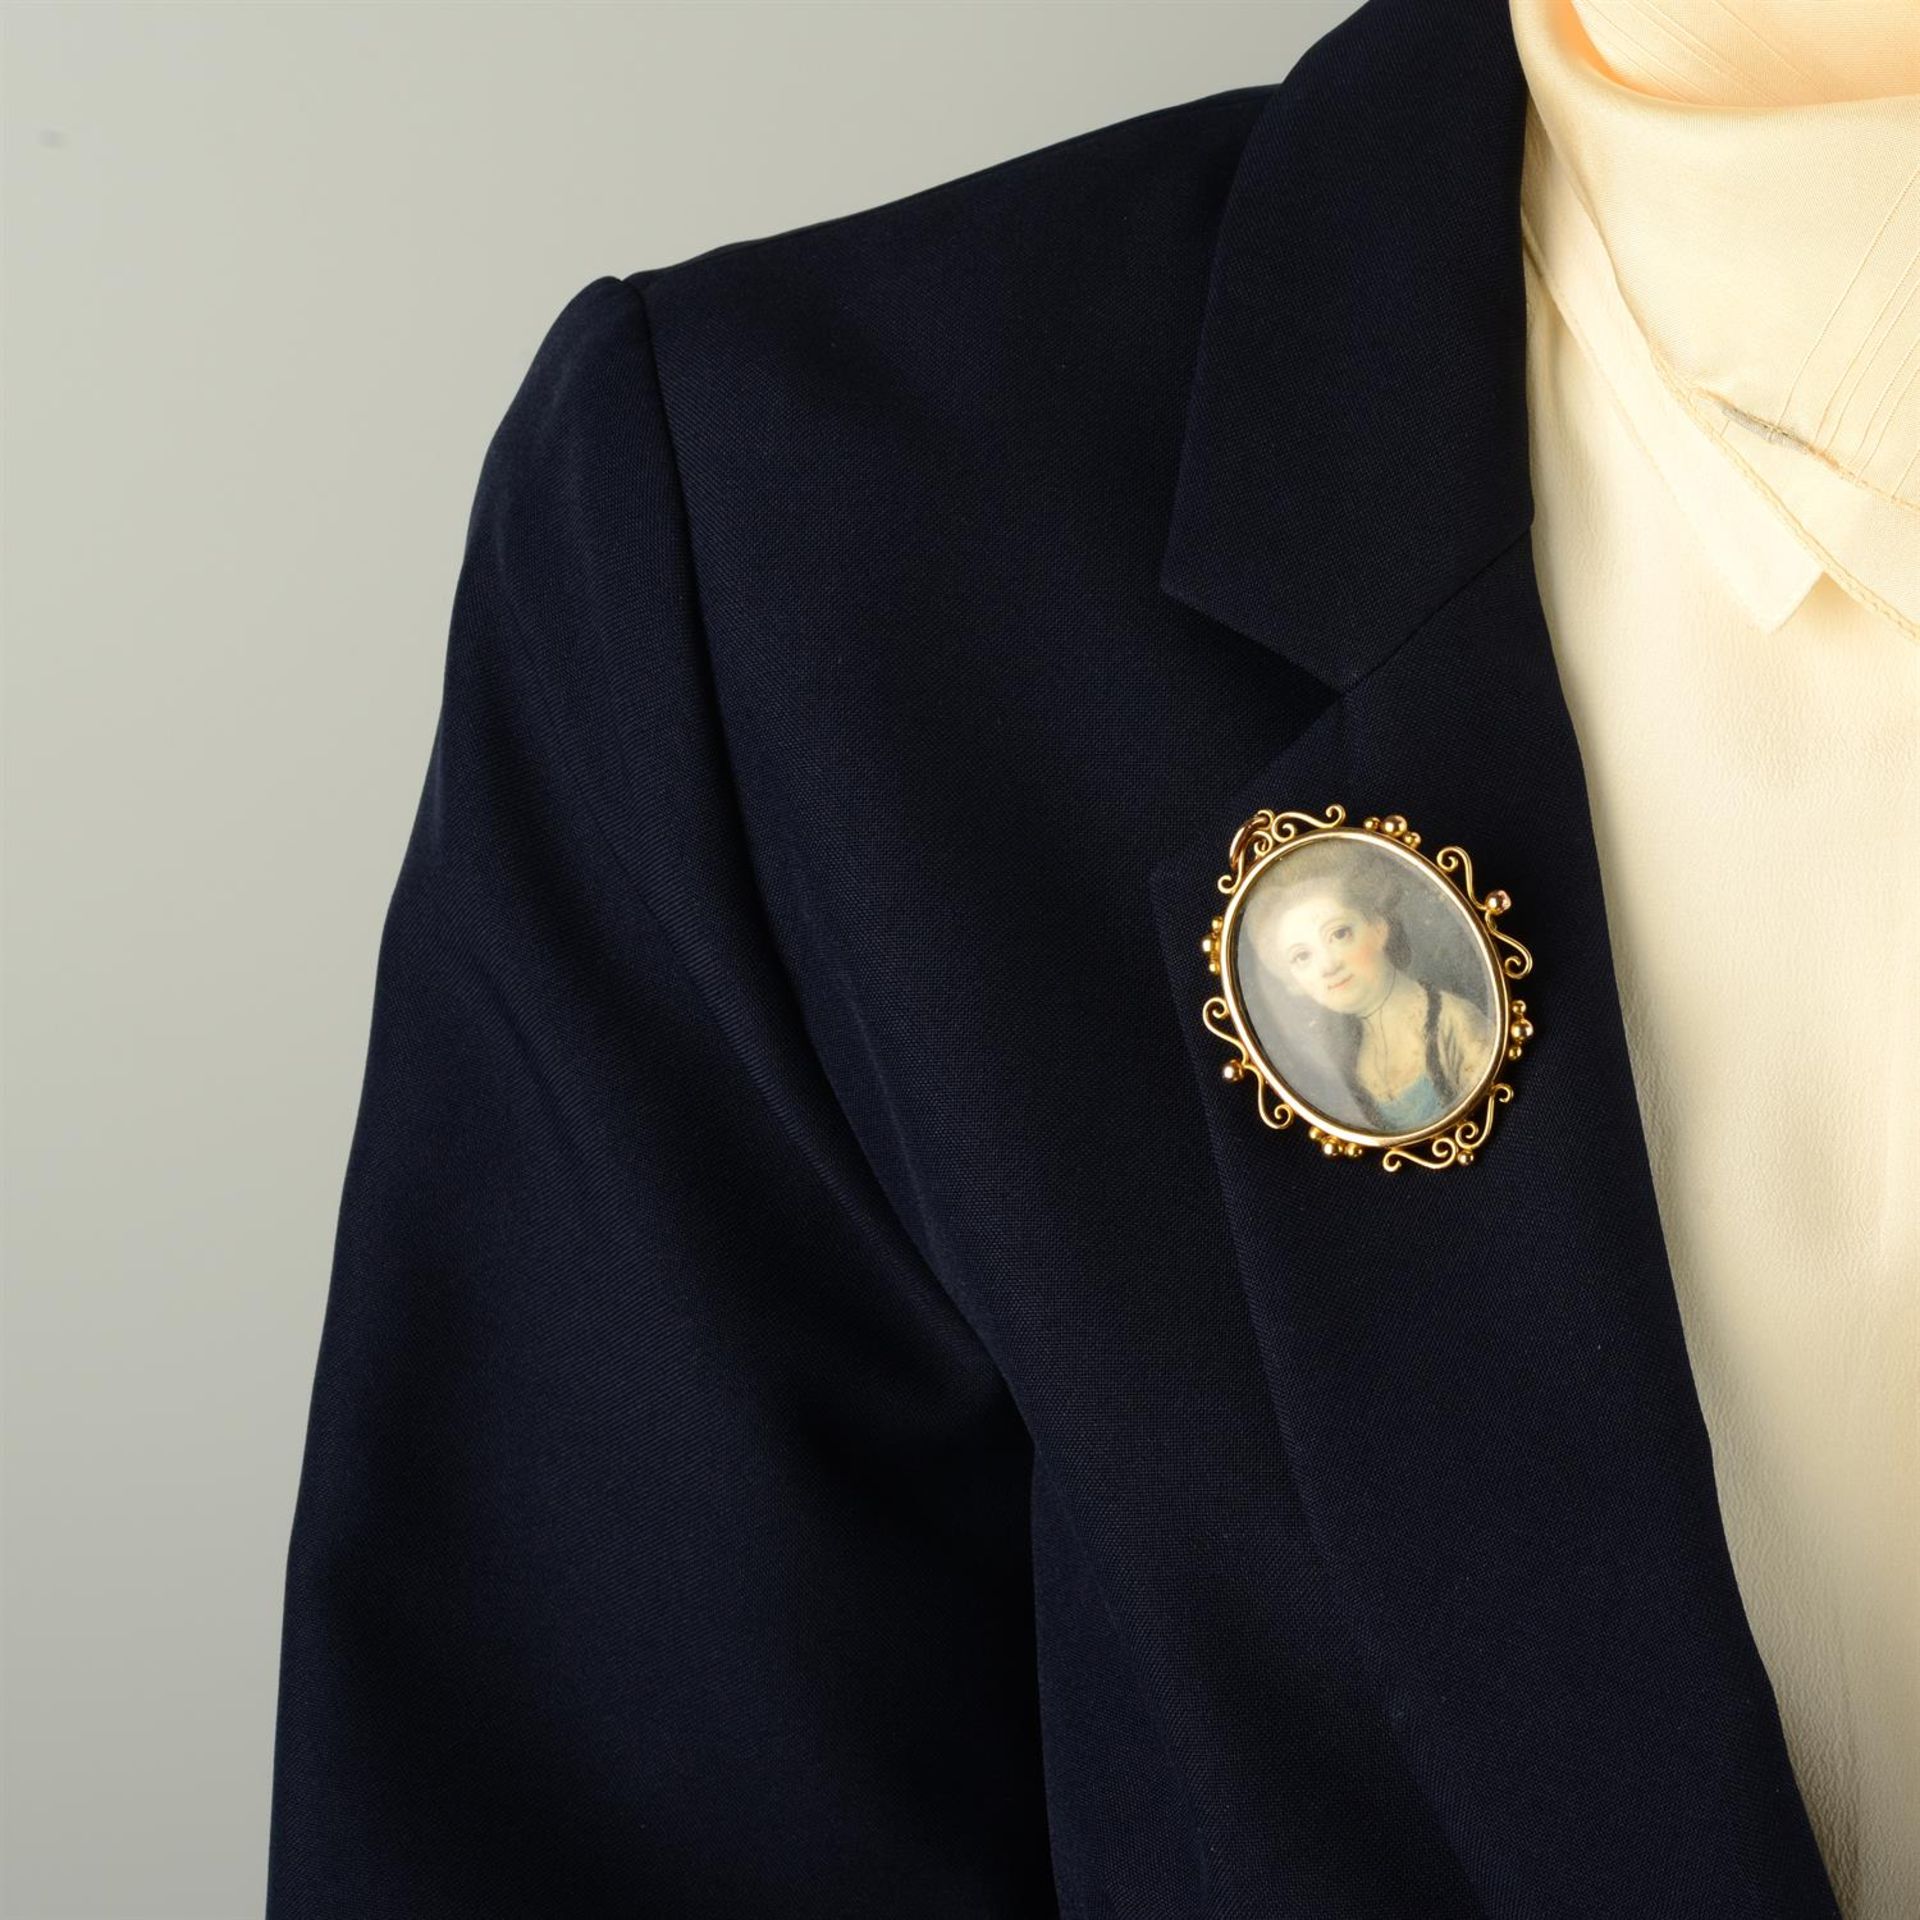 A late Georgian portrait miniature, in an early 20th century gold double-sided locket mount. - Image 4 of 4